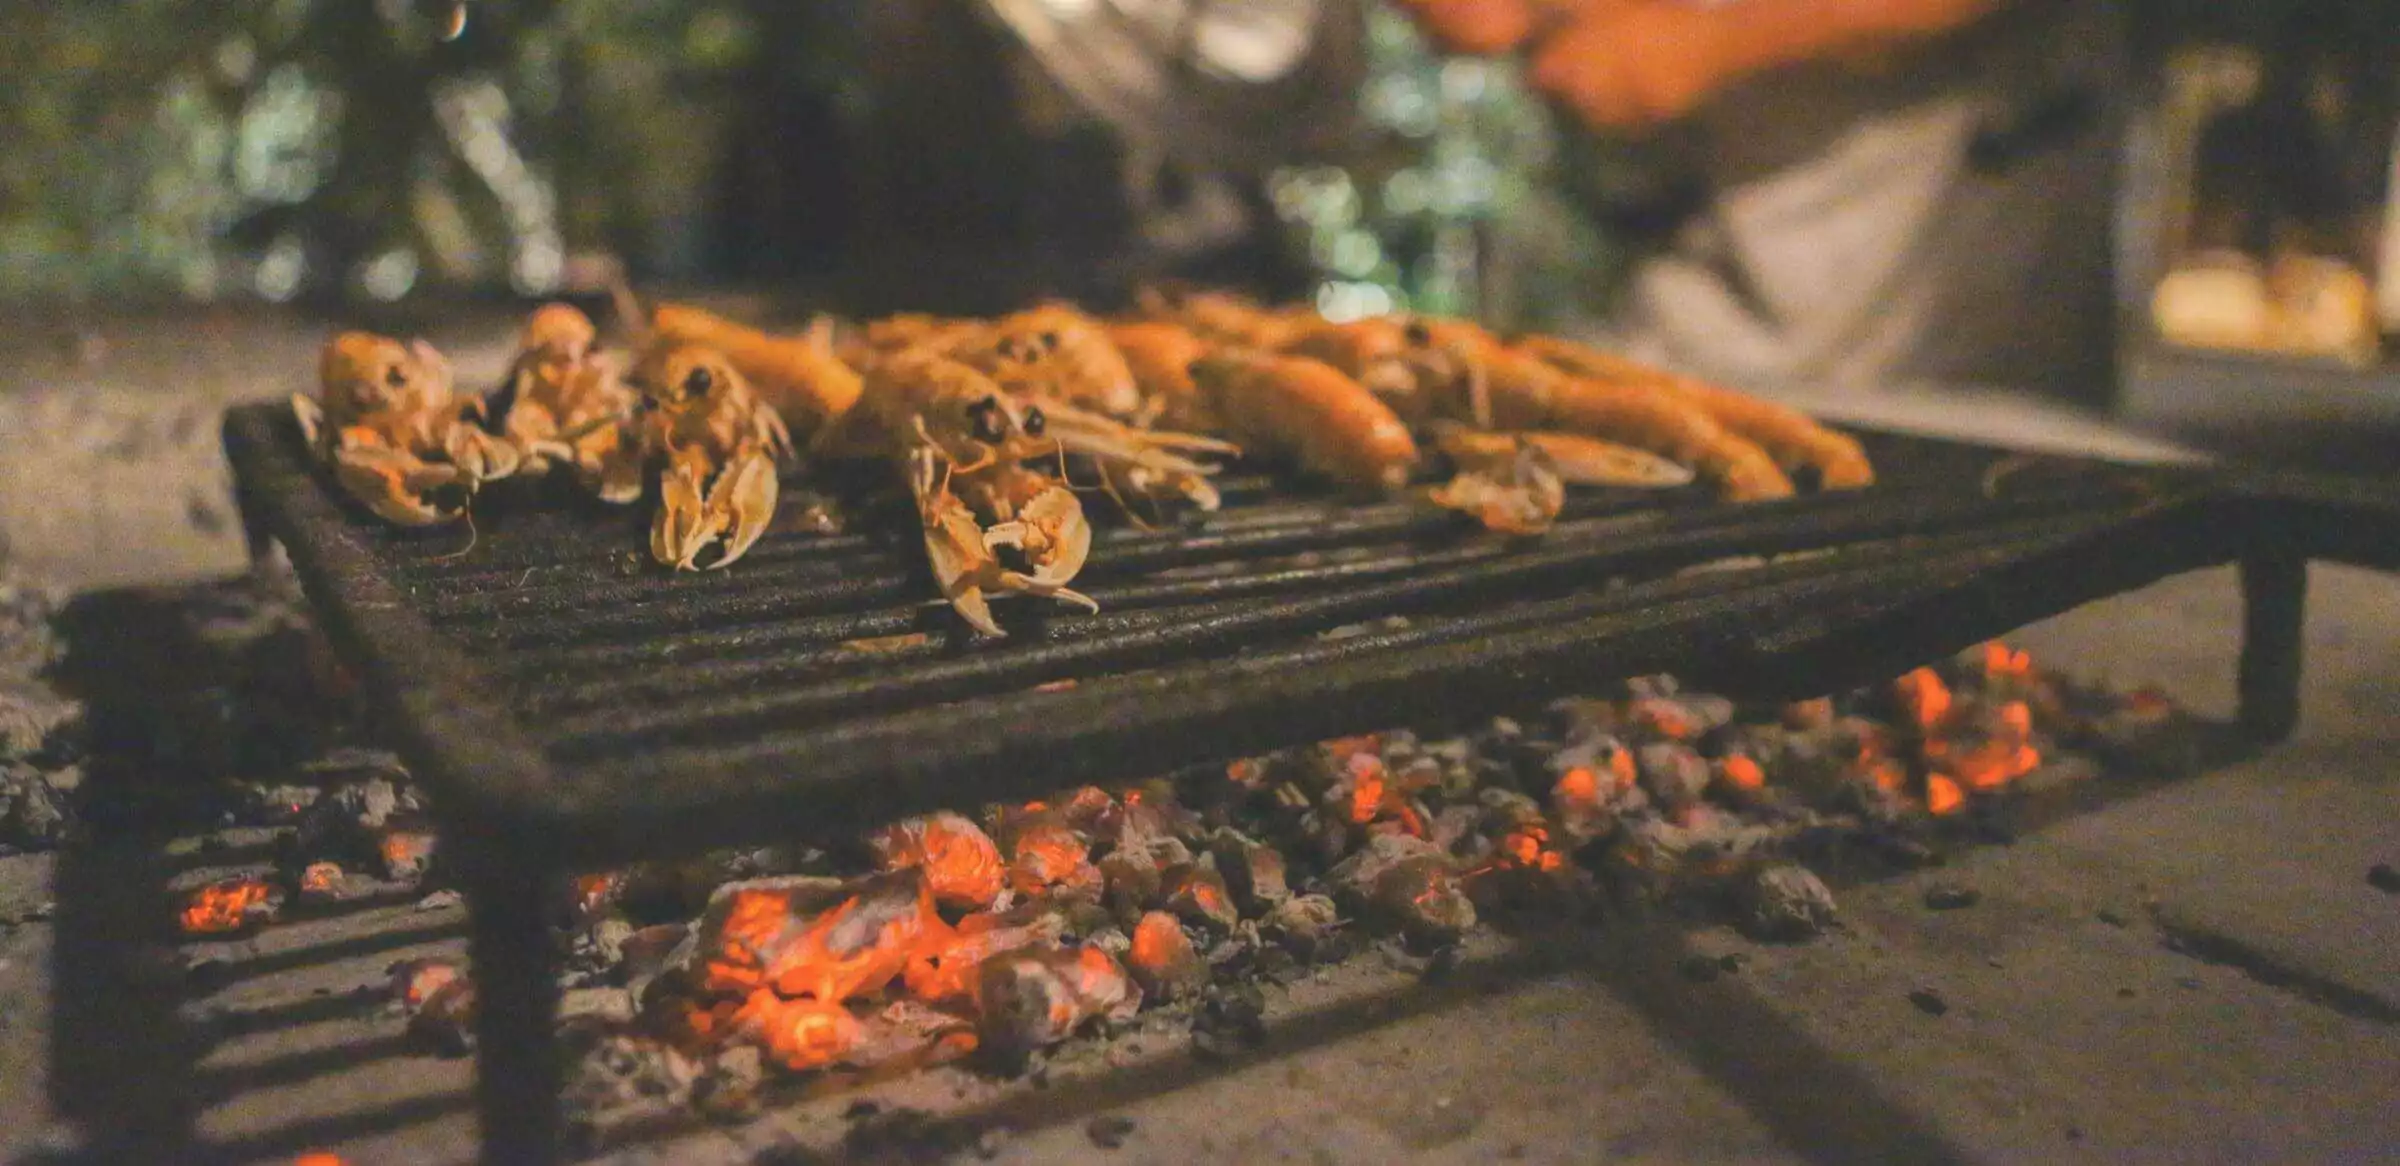 Grilled shrimps and other freshly caught of the day 